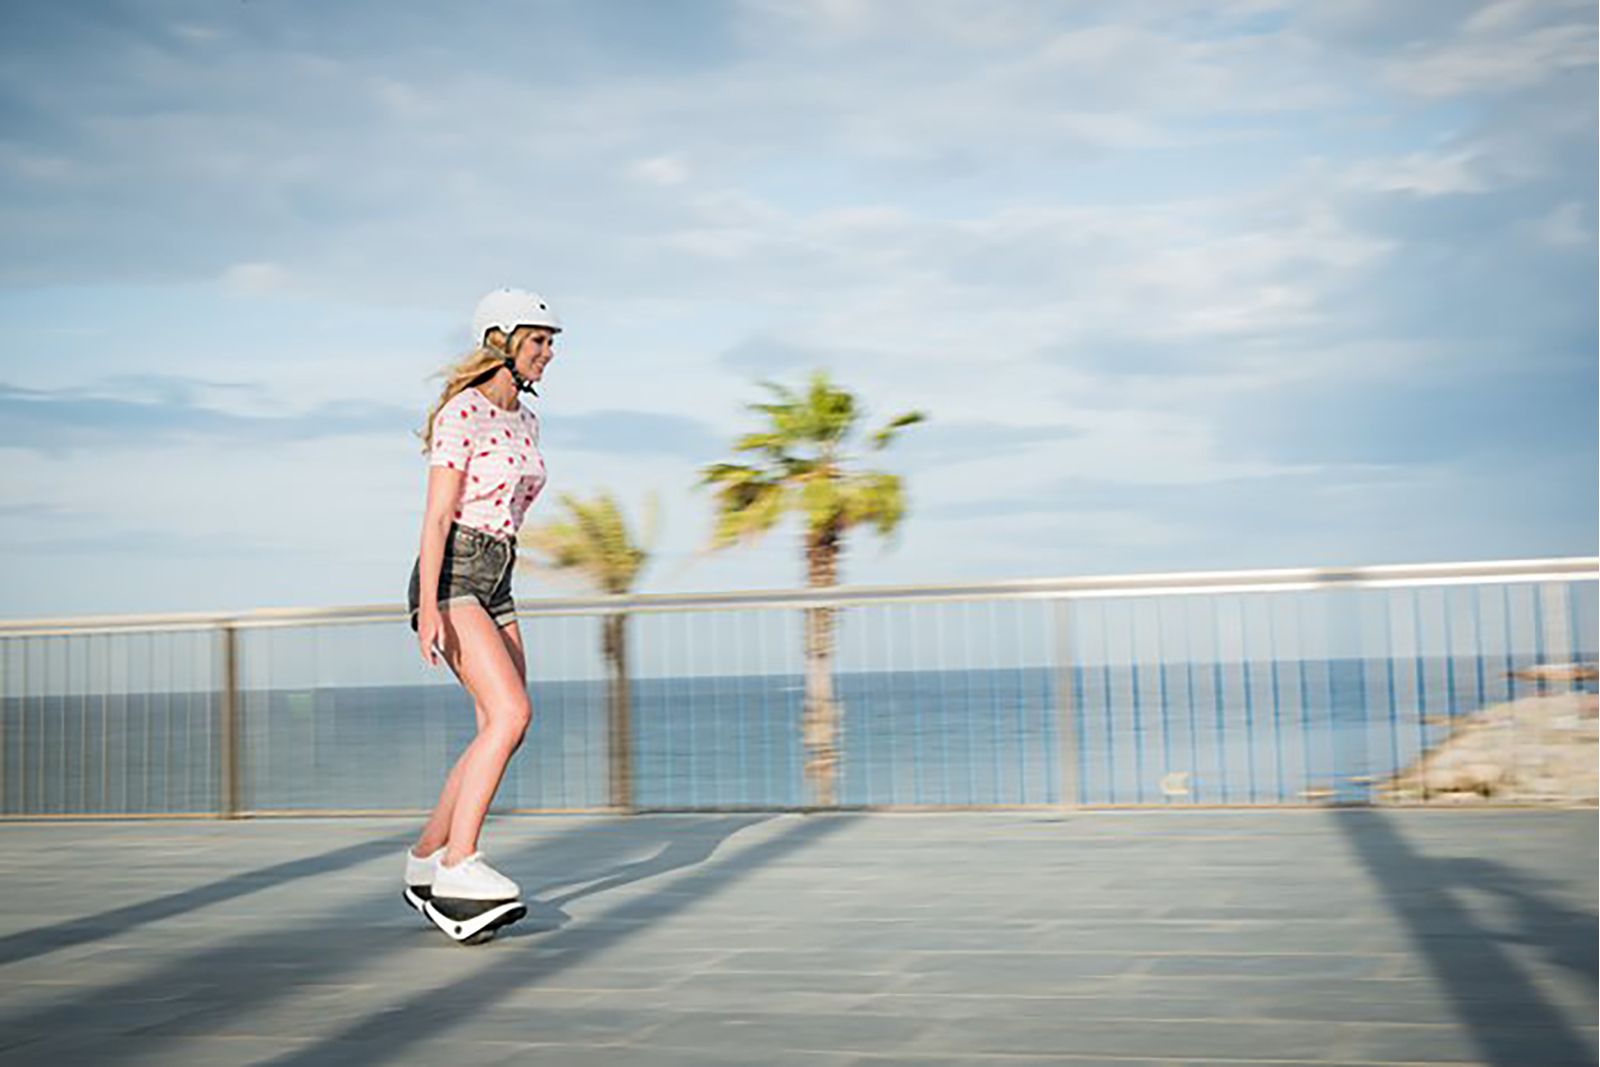 Segway just killed the hoverboard with its funky Drift W1 e-skates image 1